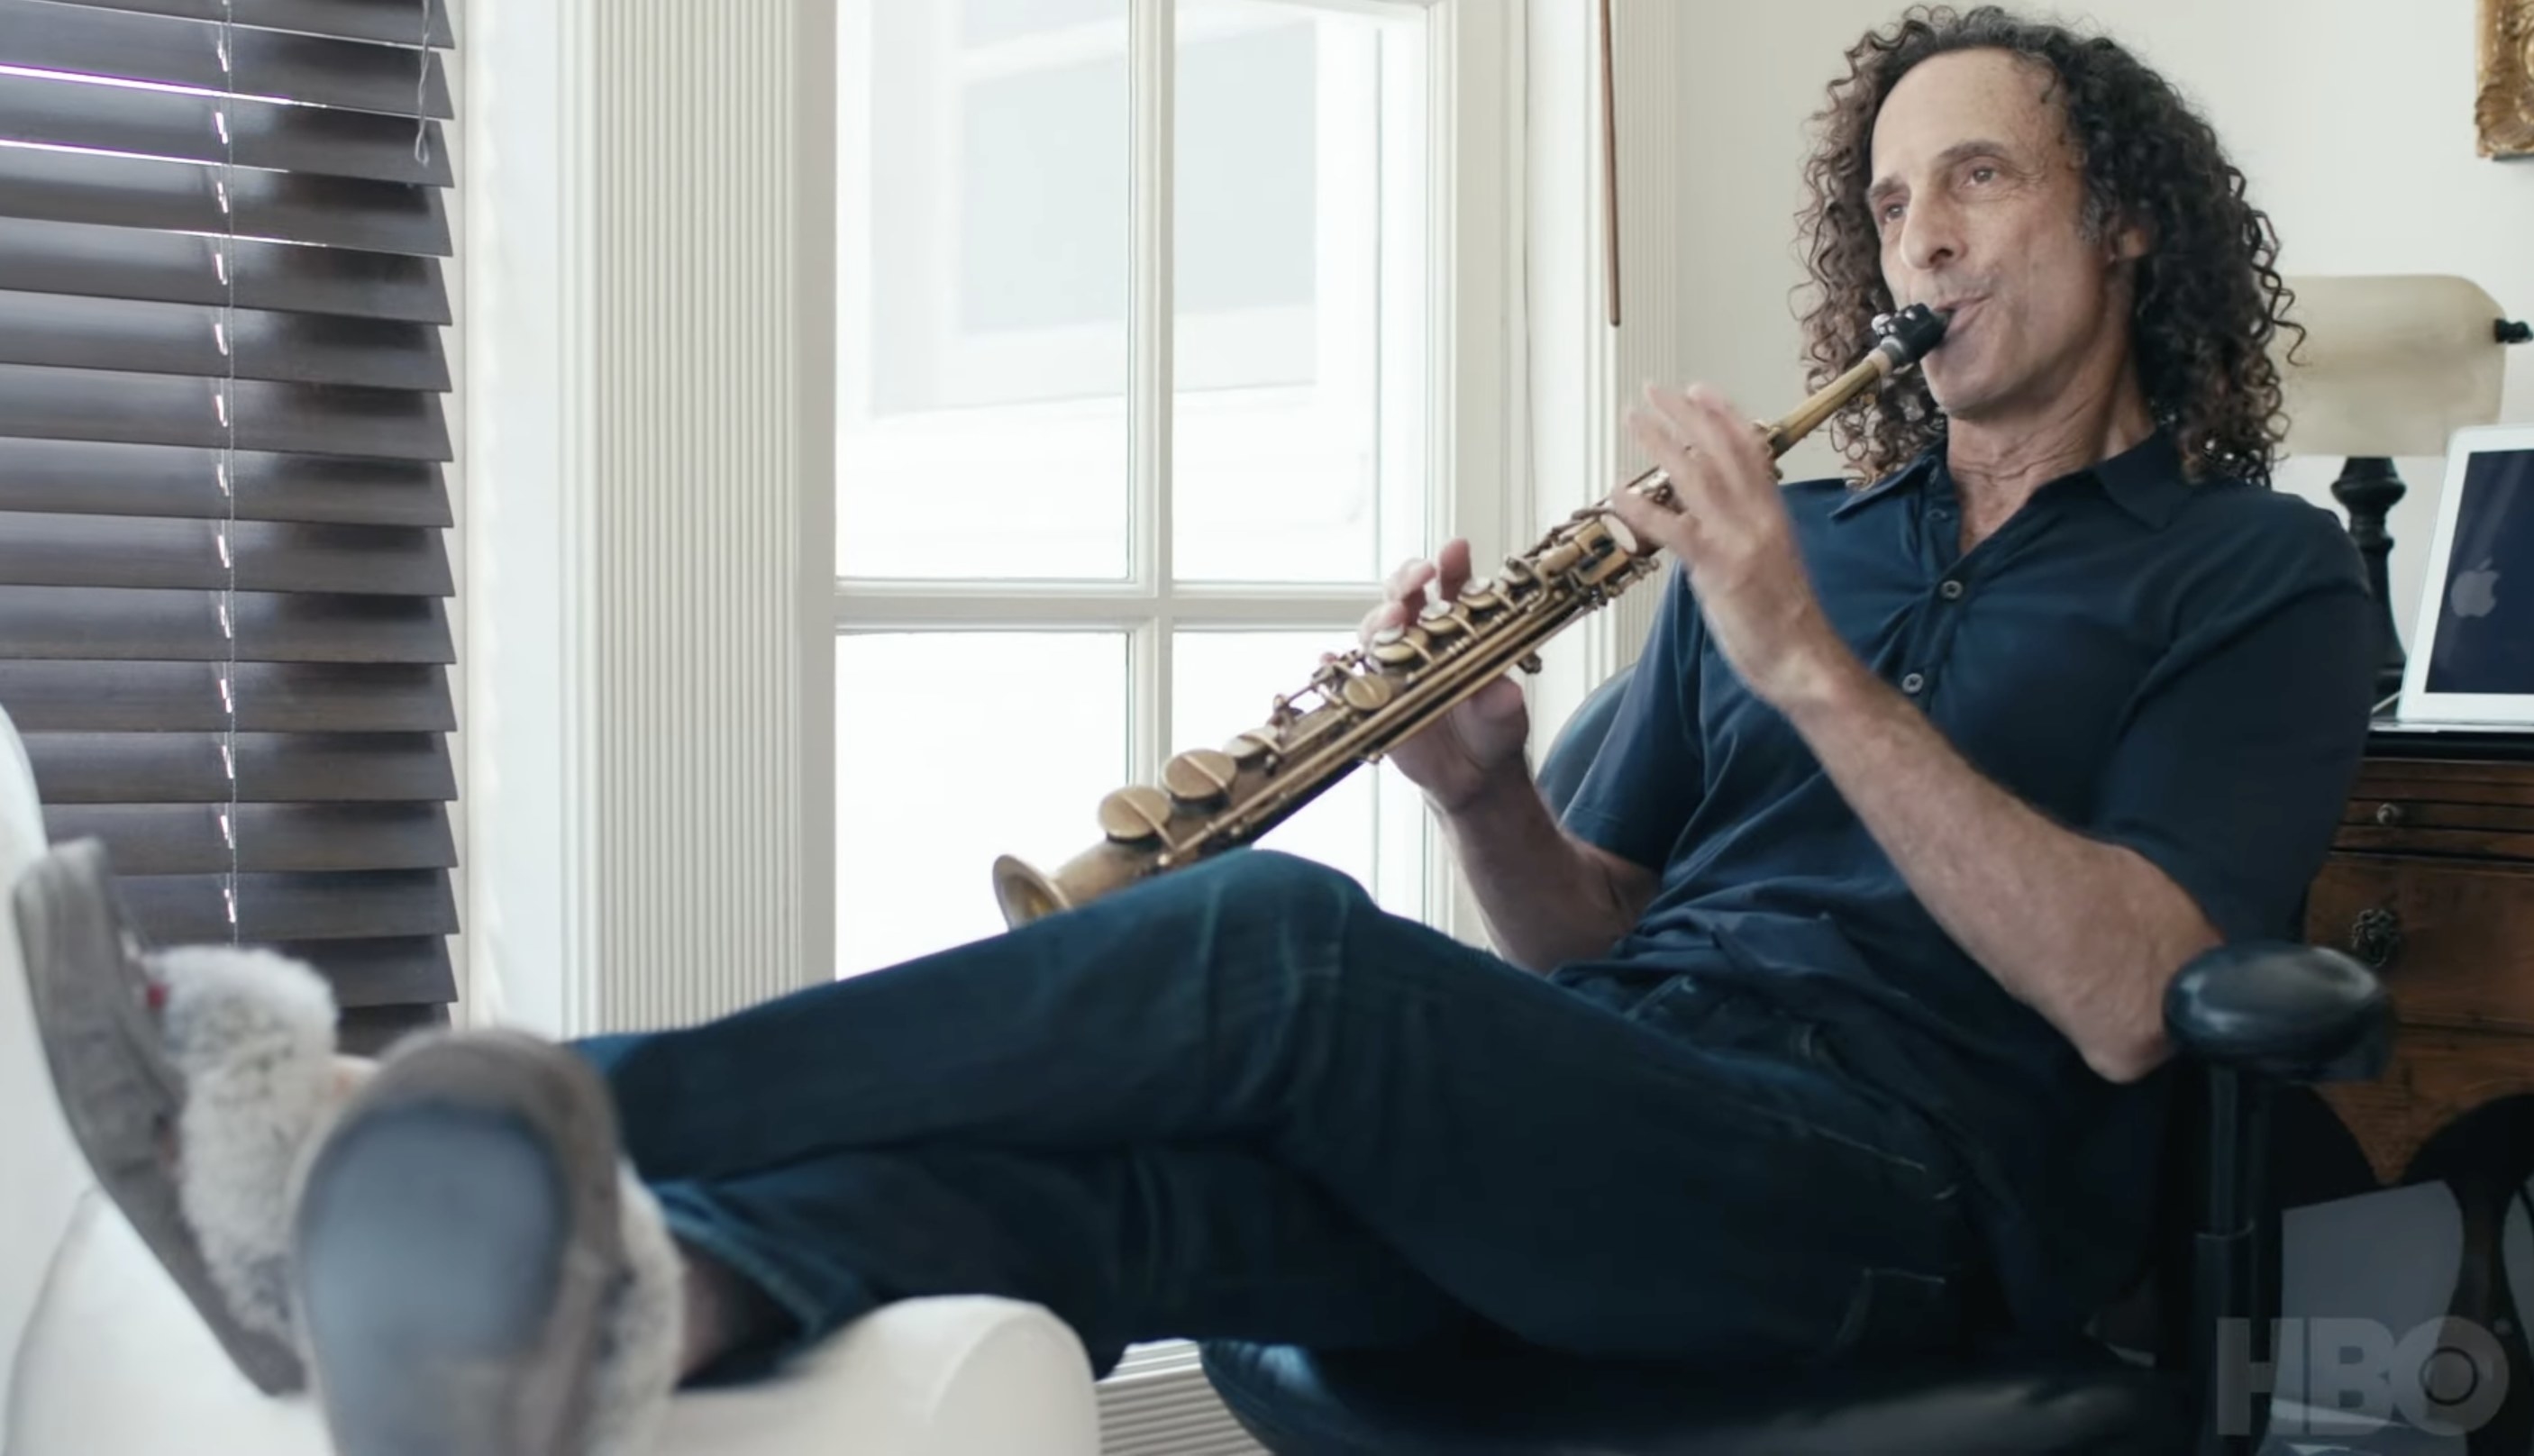 kenny g playing tenor sax in an office chair wearing slippers in &quot;listening to kenny g&quot;